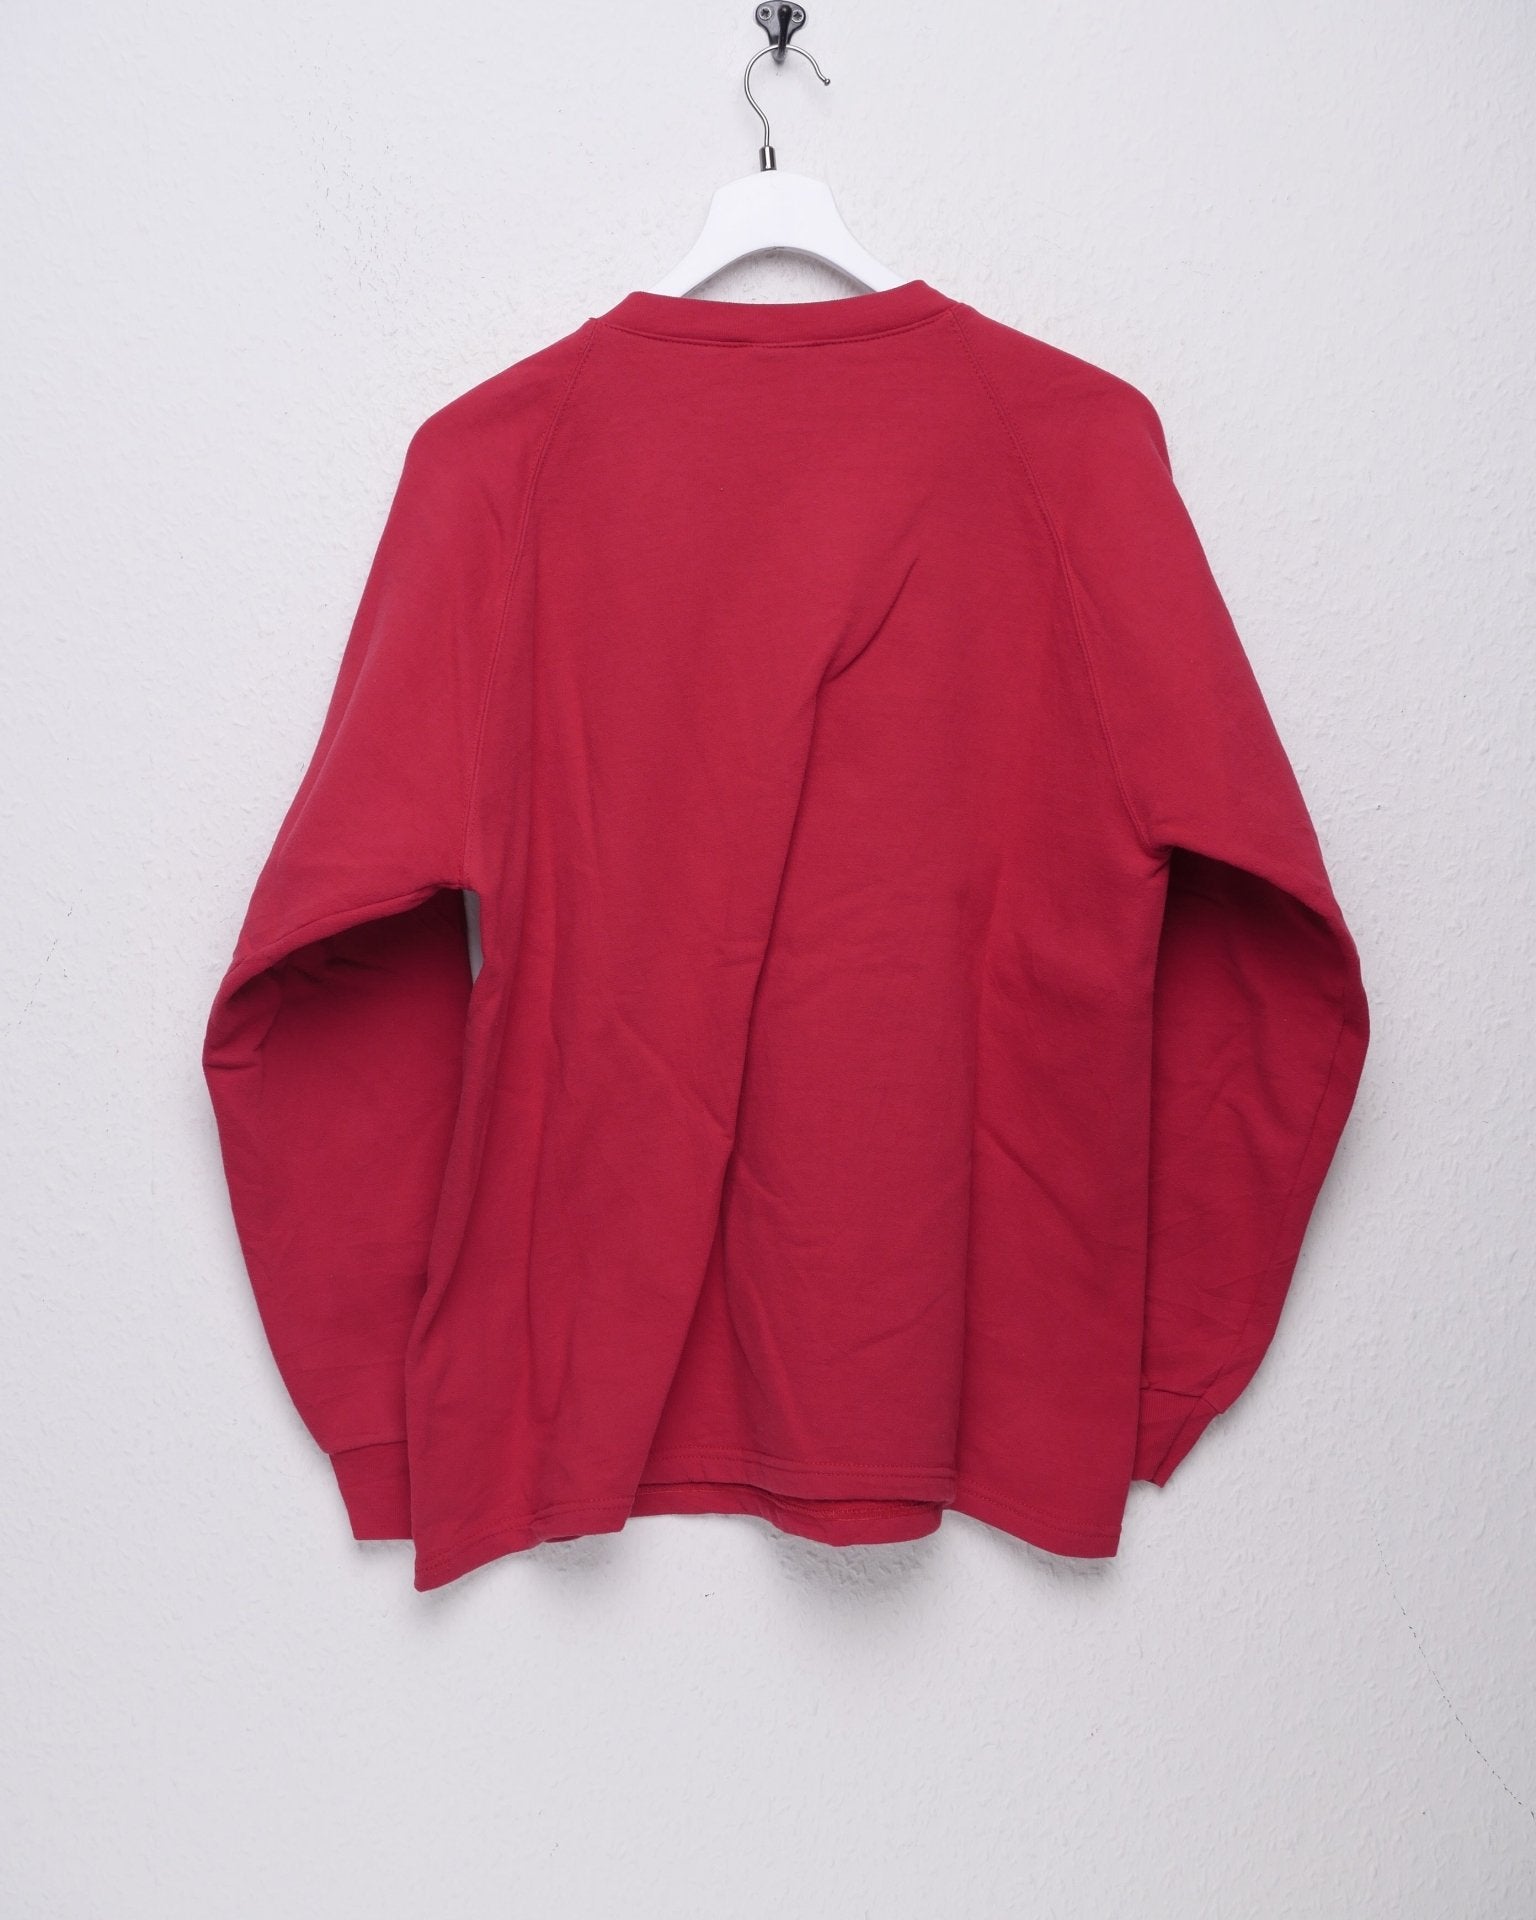 Lee embroidered Graphic red Sweater - Peeces